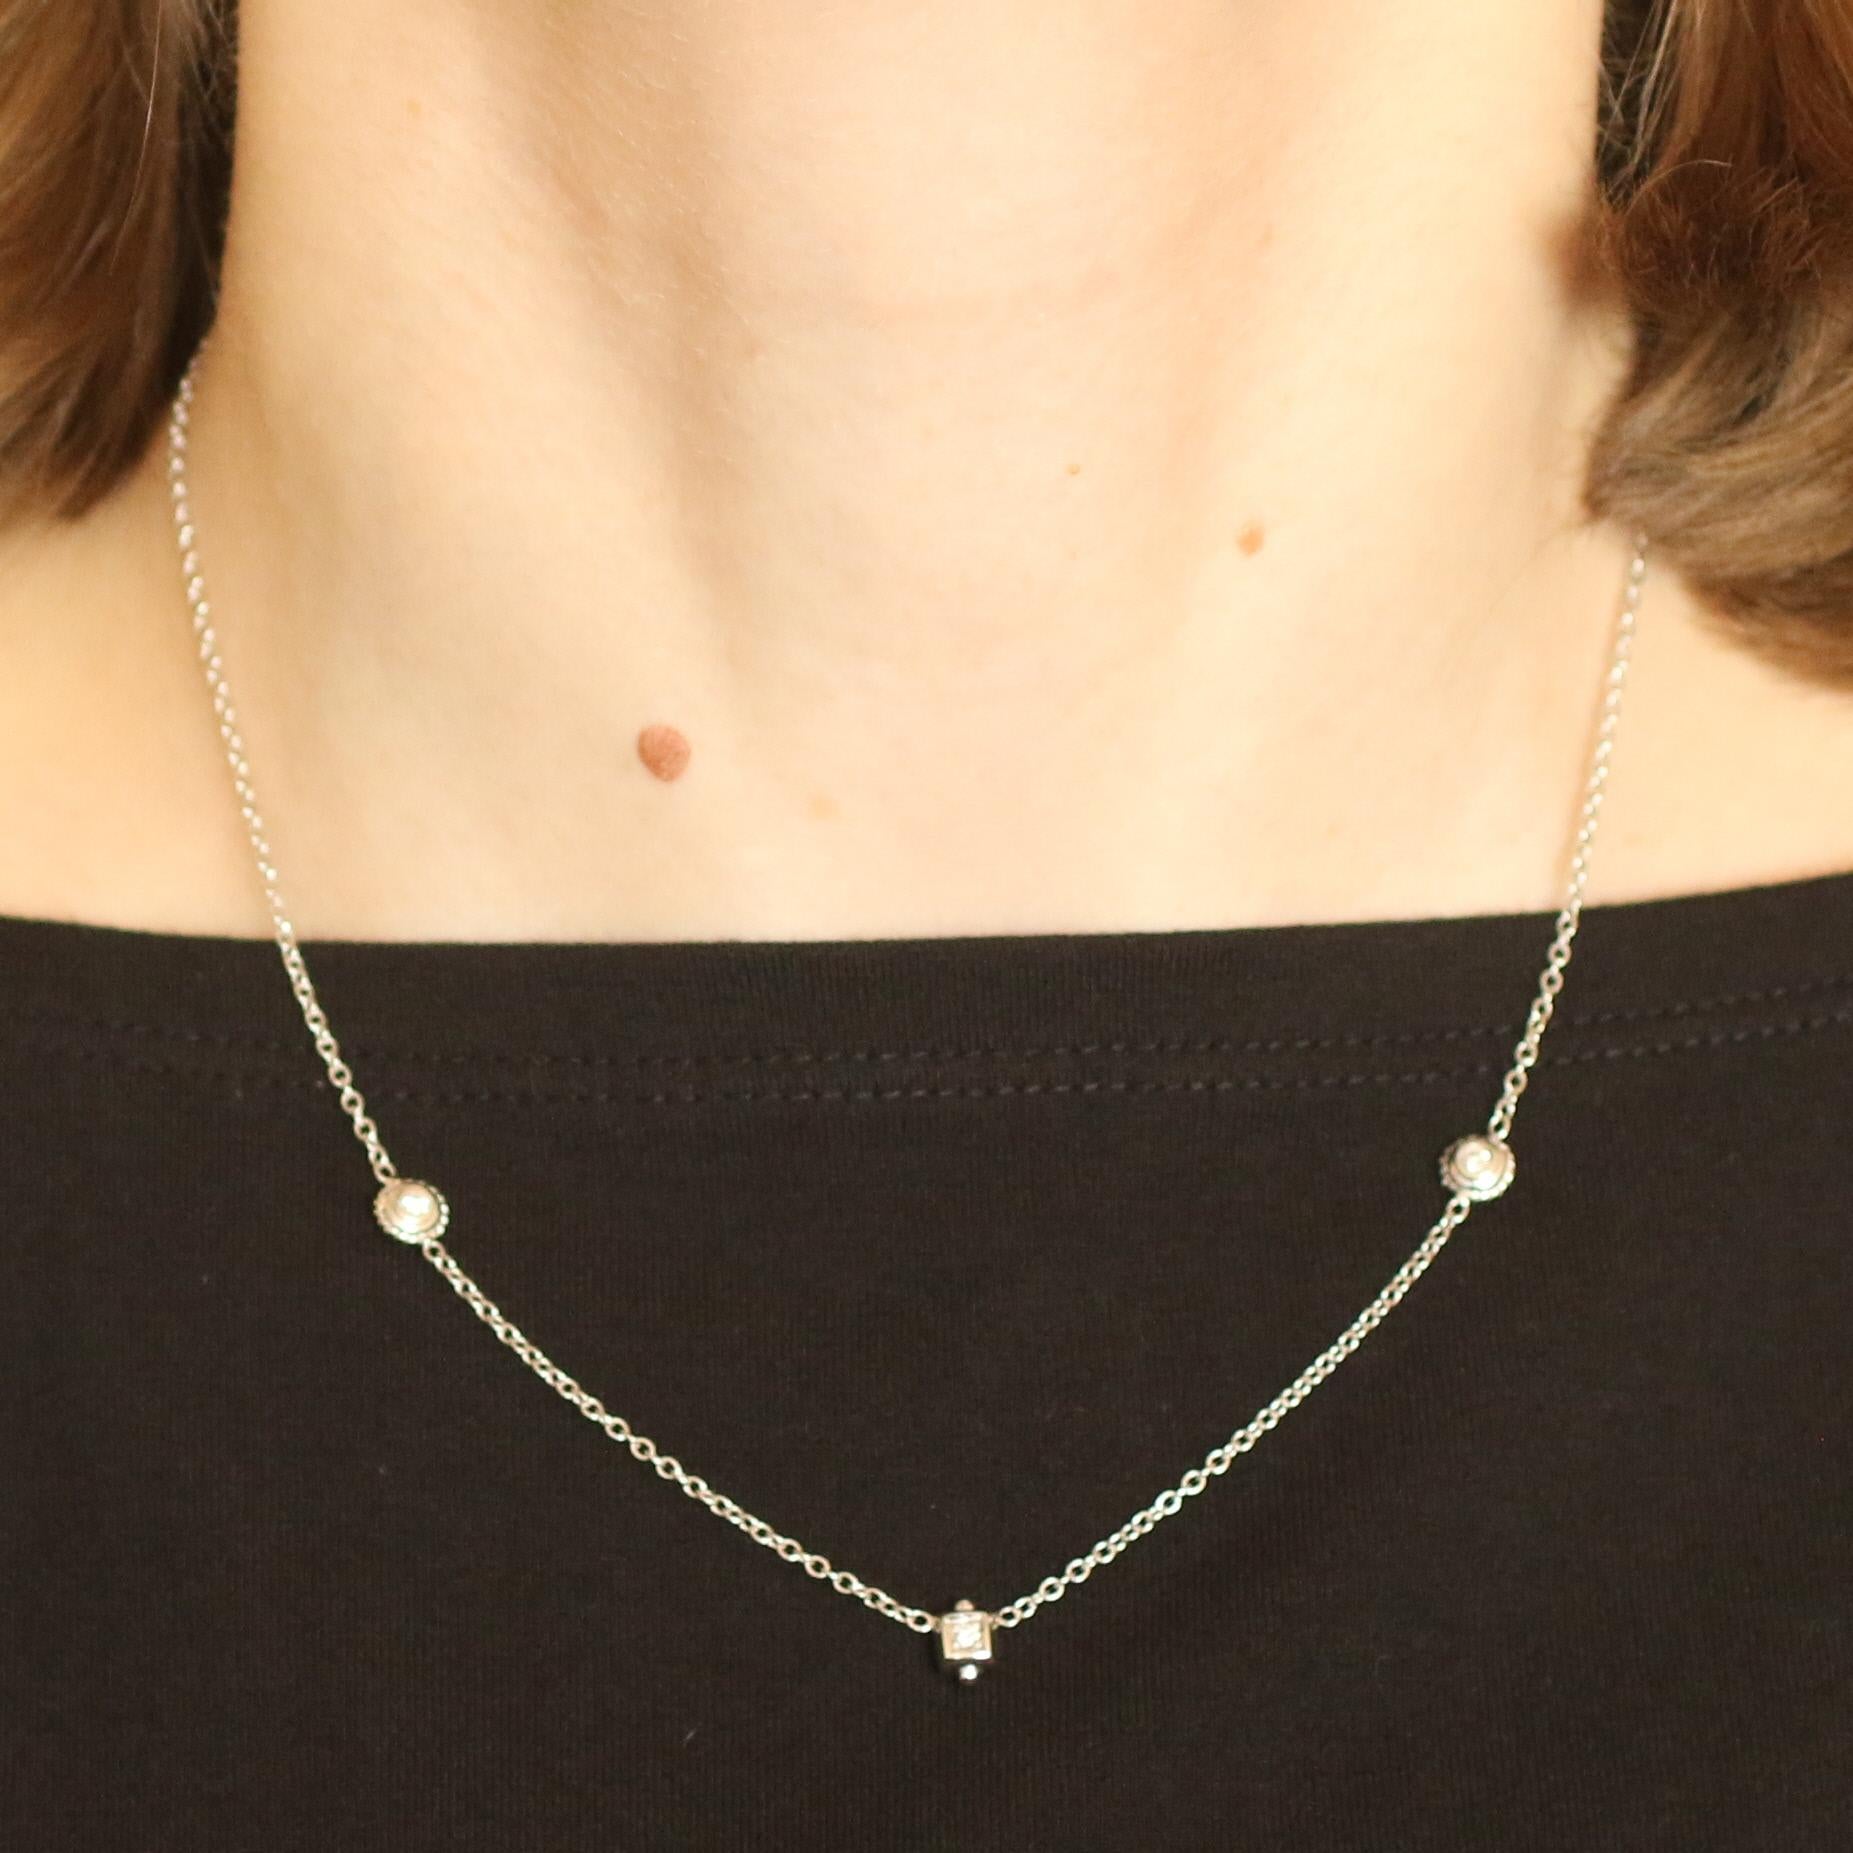 Brand: Penny Preville

Metal Content: 18k White Gold

Stone Information: 
Natural Diamonds
Total Carats: 24ctw
Cut: Round Brilliant
Color: G
Clarity: VS1

Necklace Style: Station
Chain Style: Cable
Closure Type: Lobster Claw Clasp

Measurements: